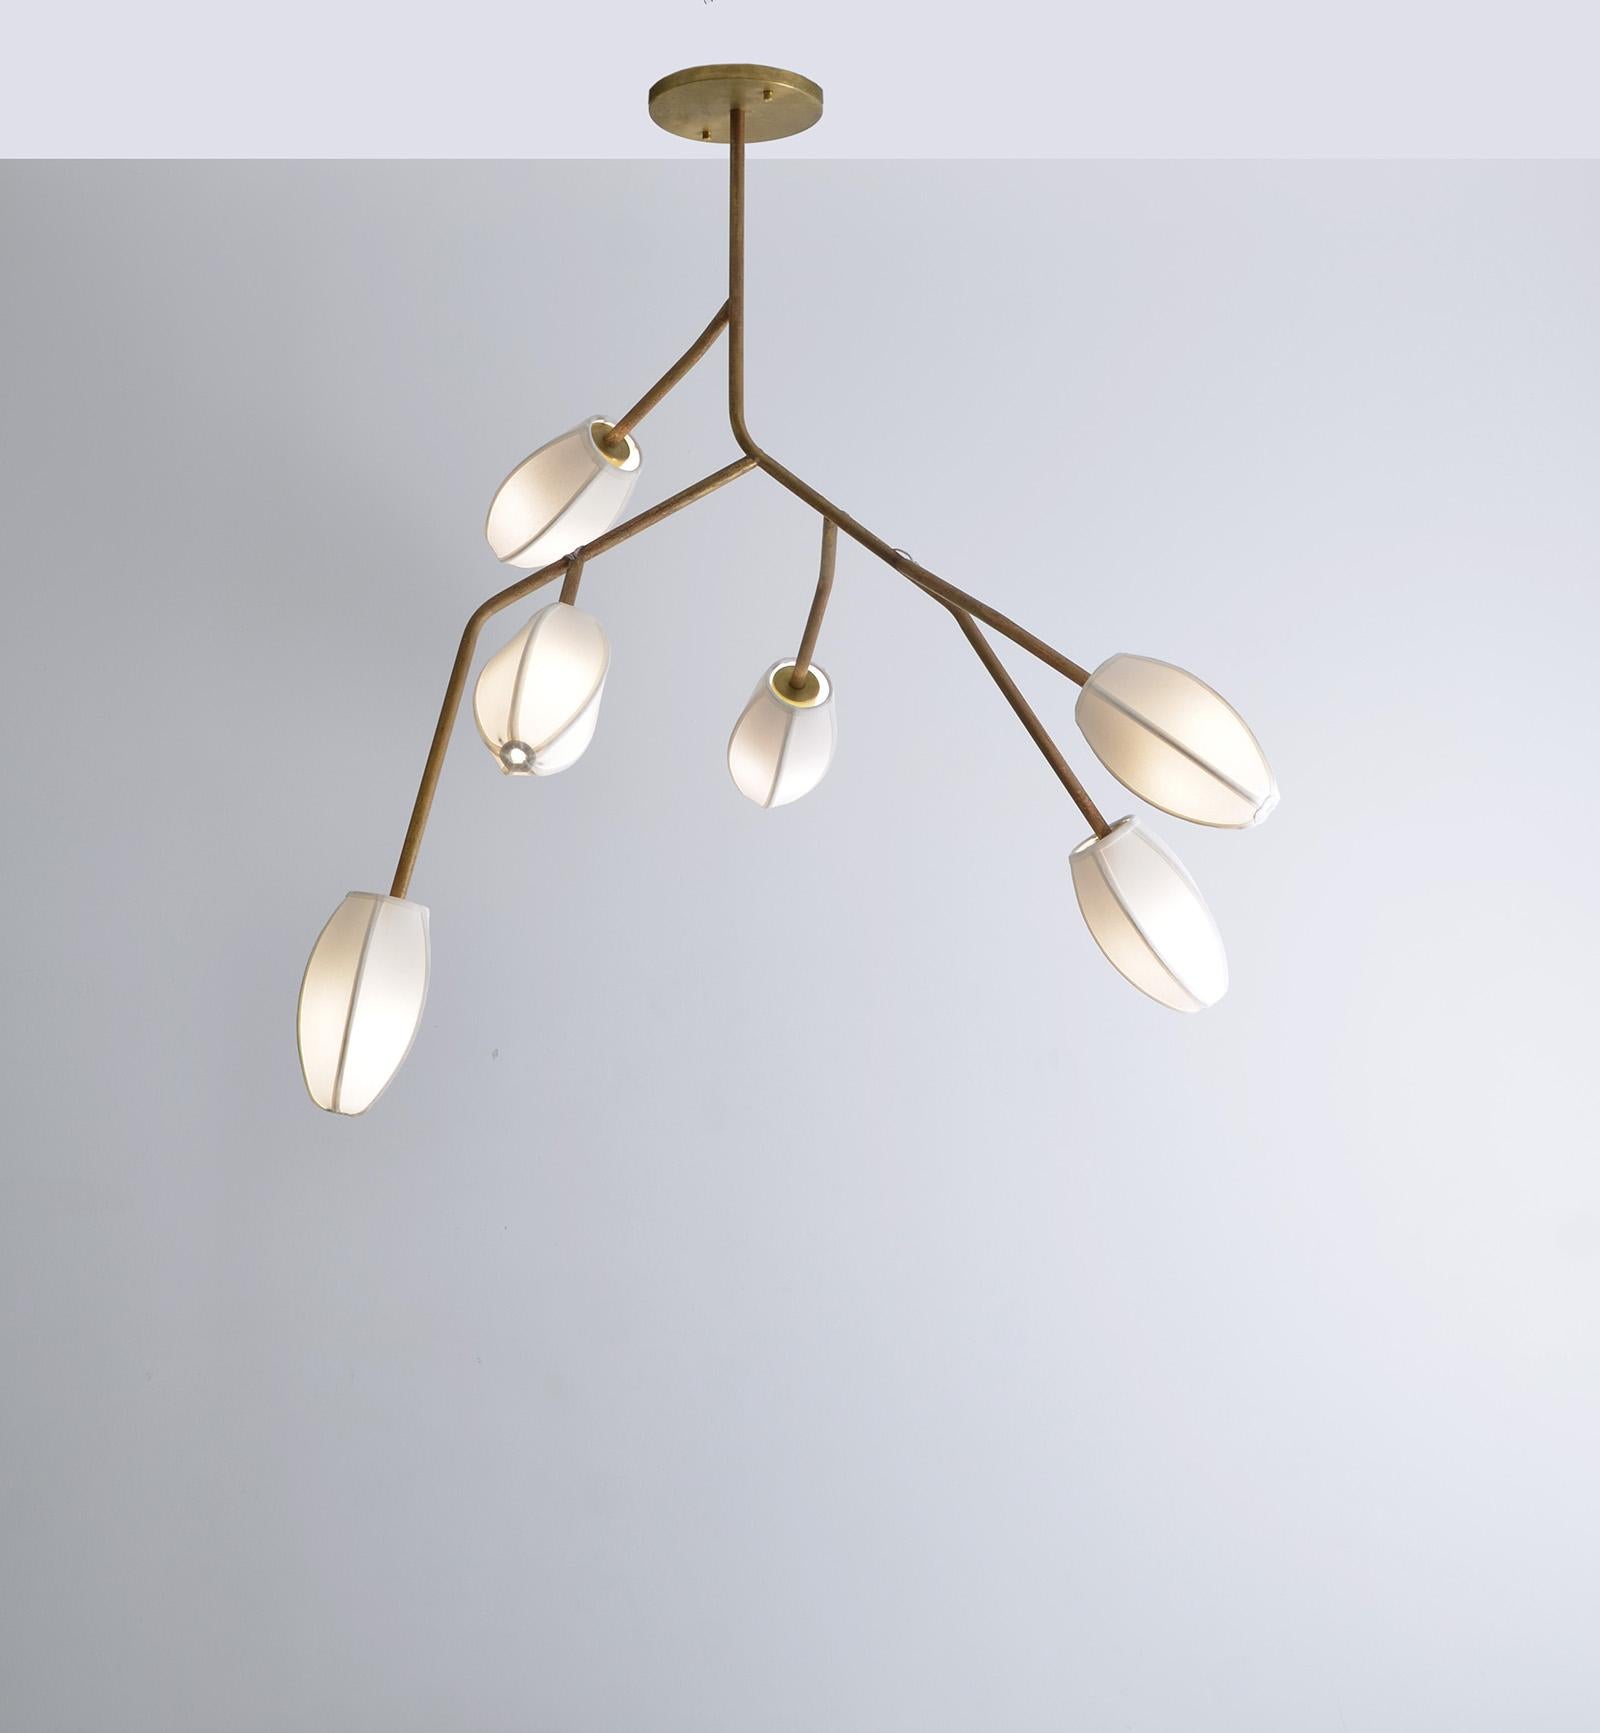 Sacurá - Sculptural light pendant in brass with natural finish without varnish. The finish on this sculptural pendant light darkens over time. The mall cotton domes in various colors.

The design of this pendant light is based on cherry trees with